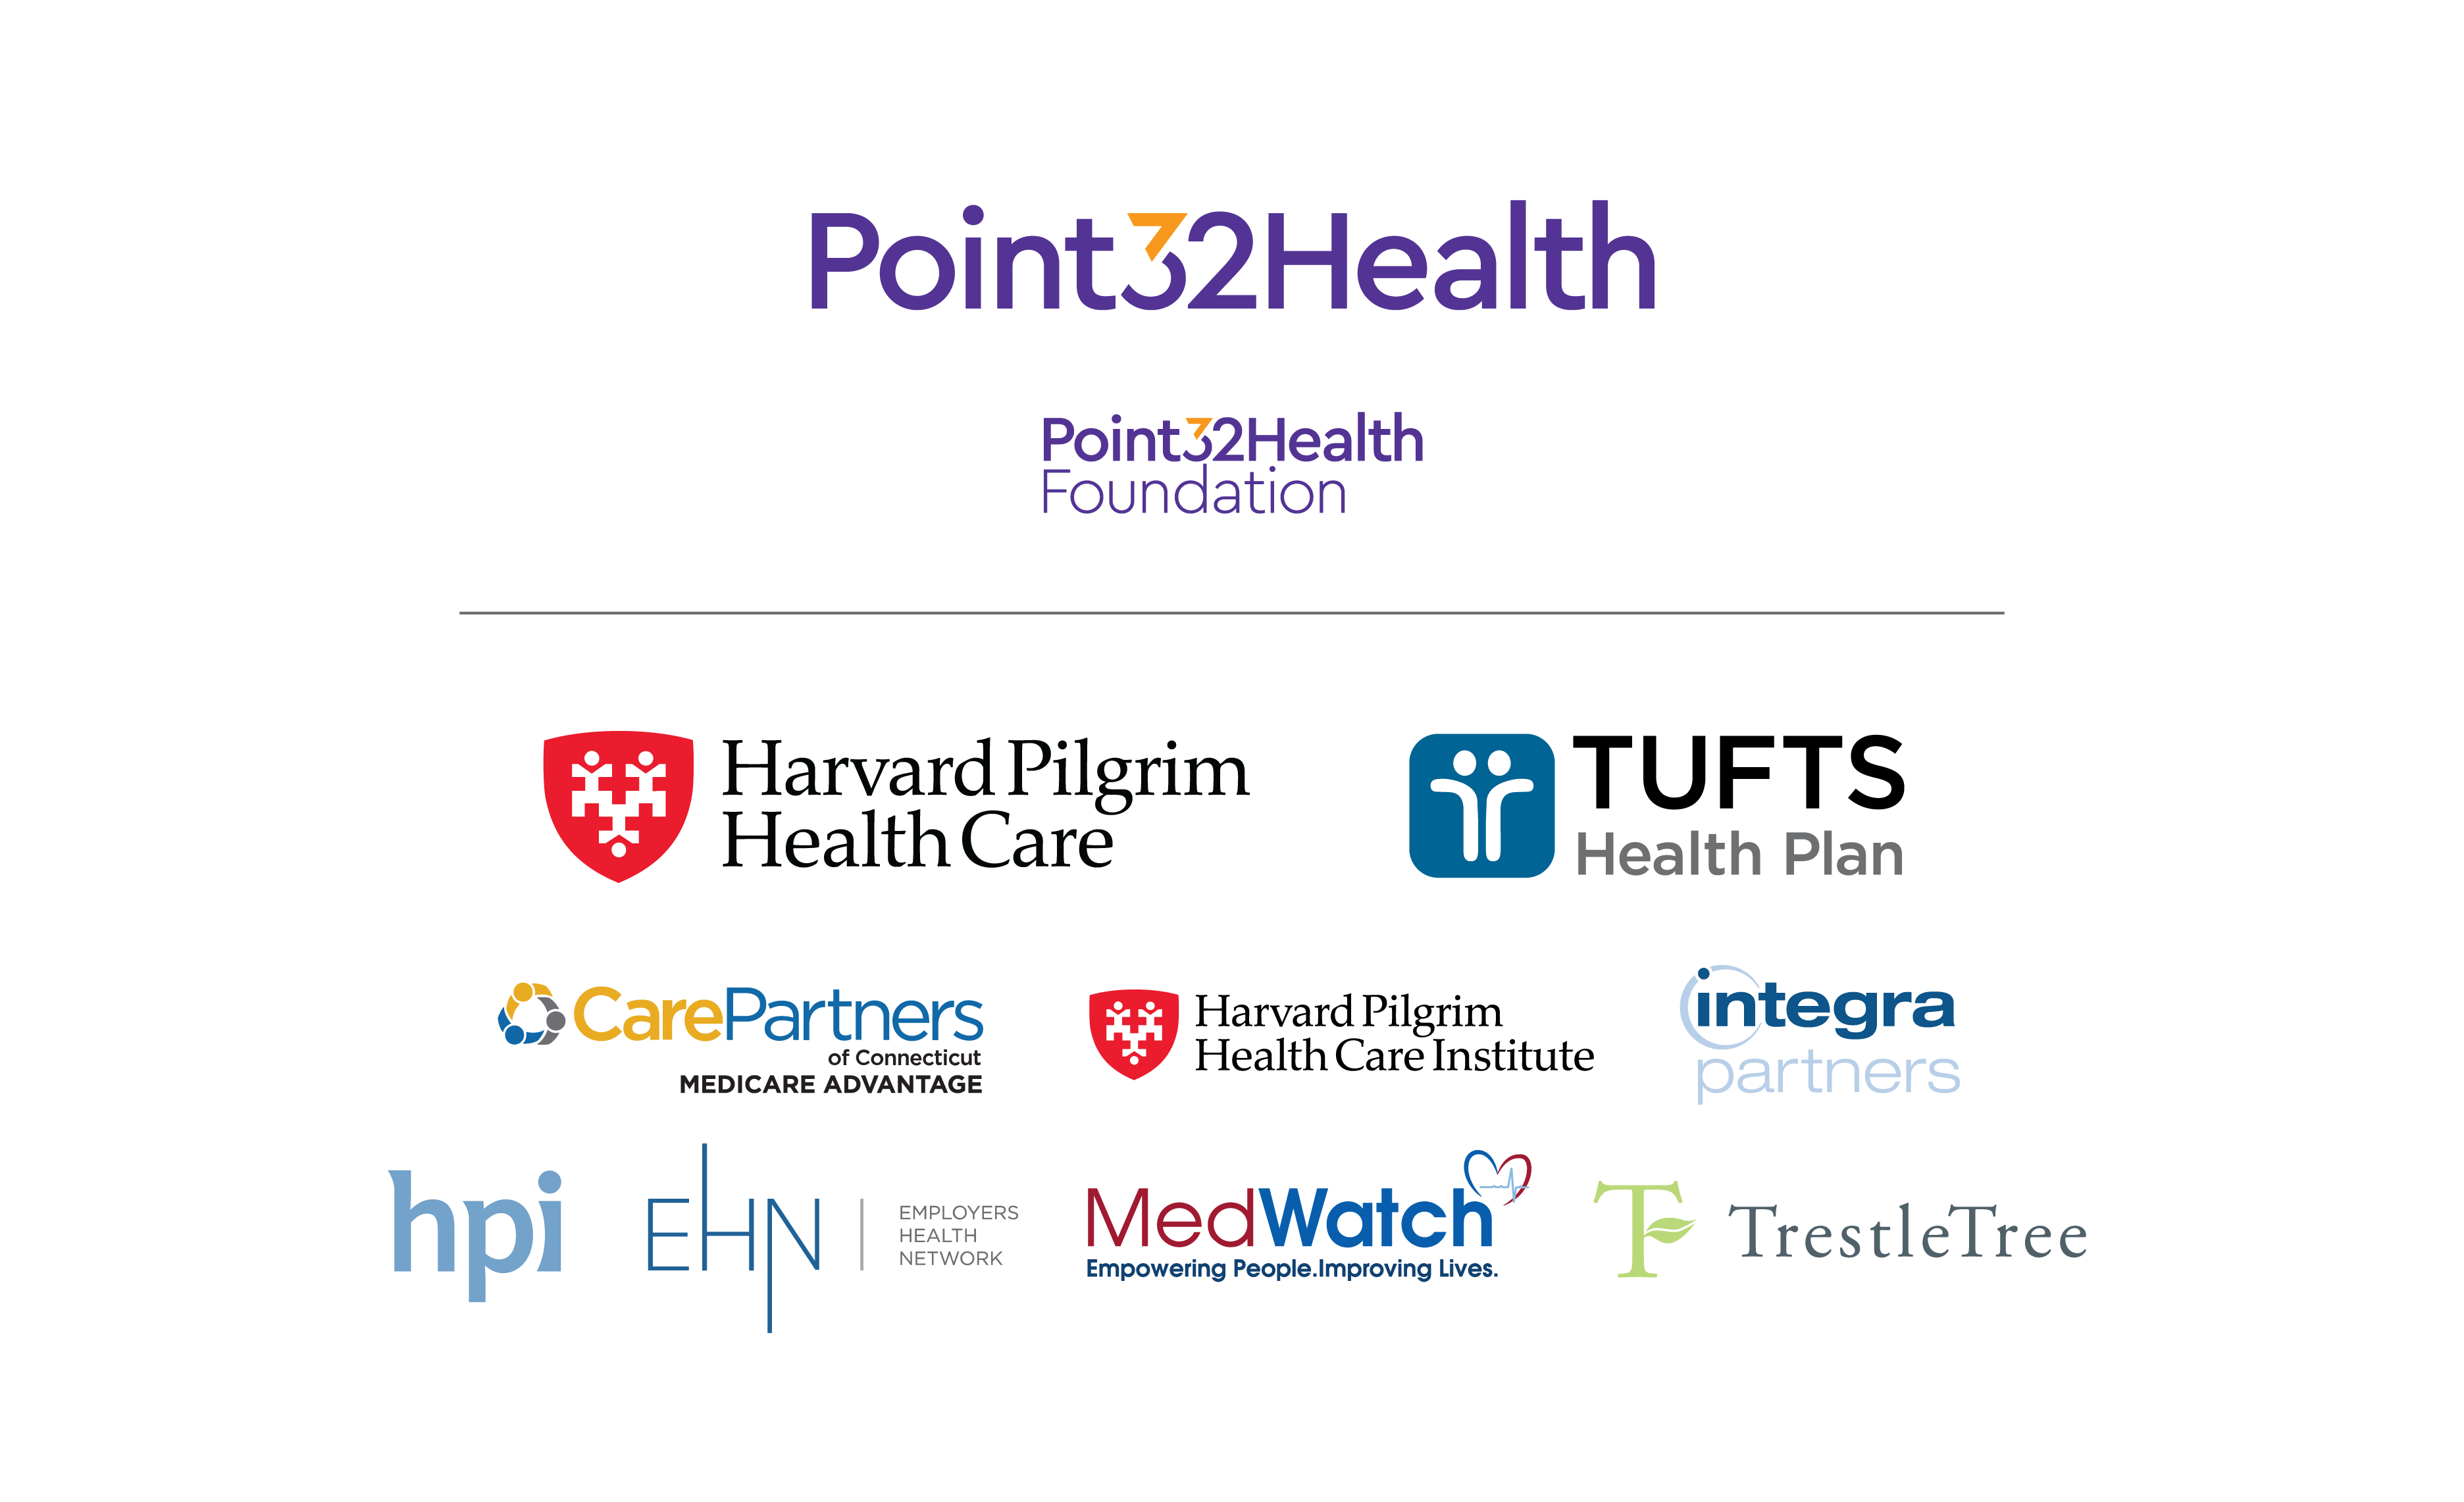 Collection of logos from the Point32Health family of companies